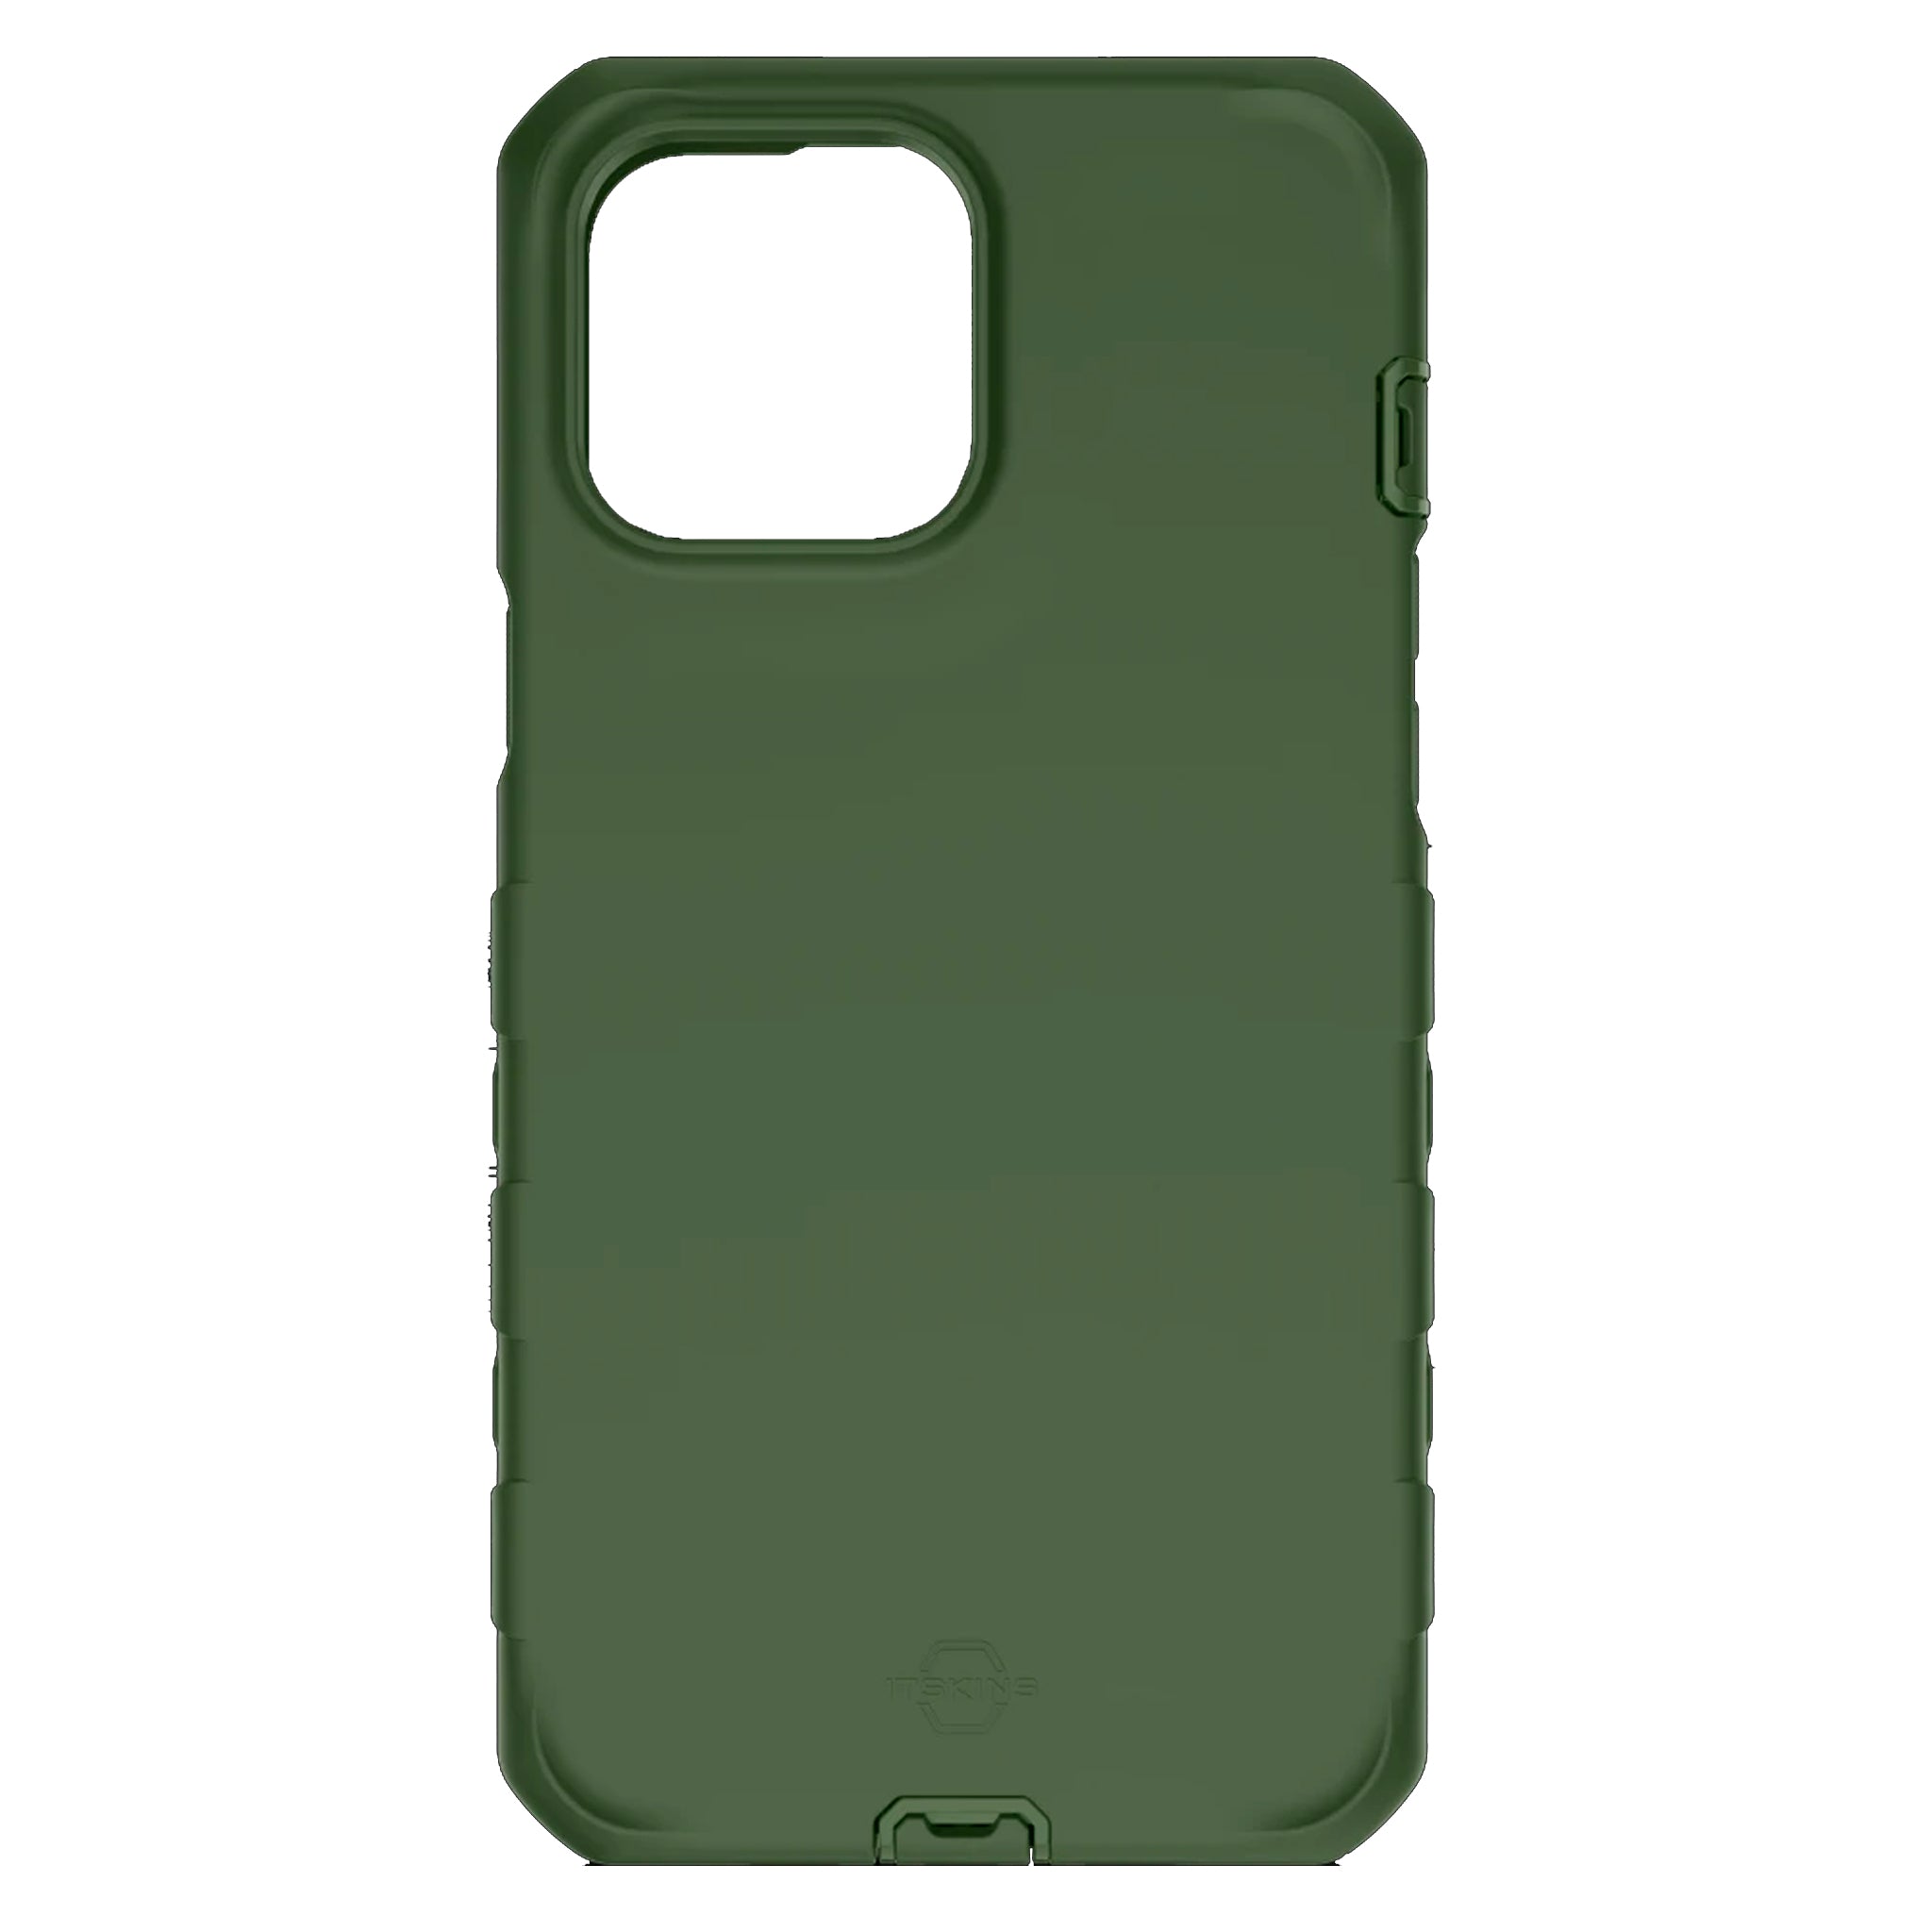 Itskins - Supreme Solid Case For Apple Iphone 13 Pro Max / 12 Pro Max - Olive Green